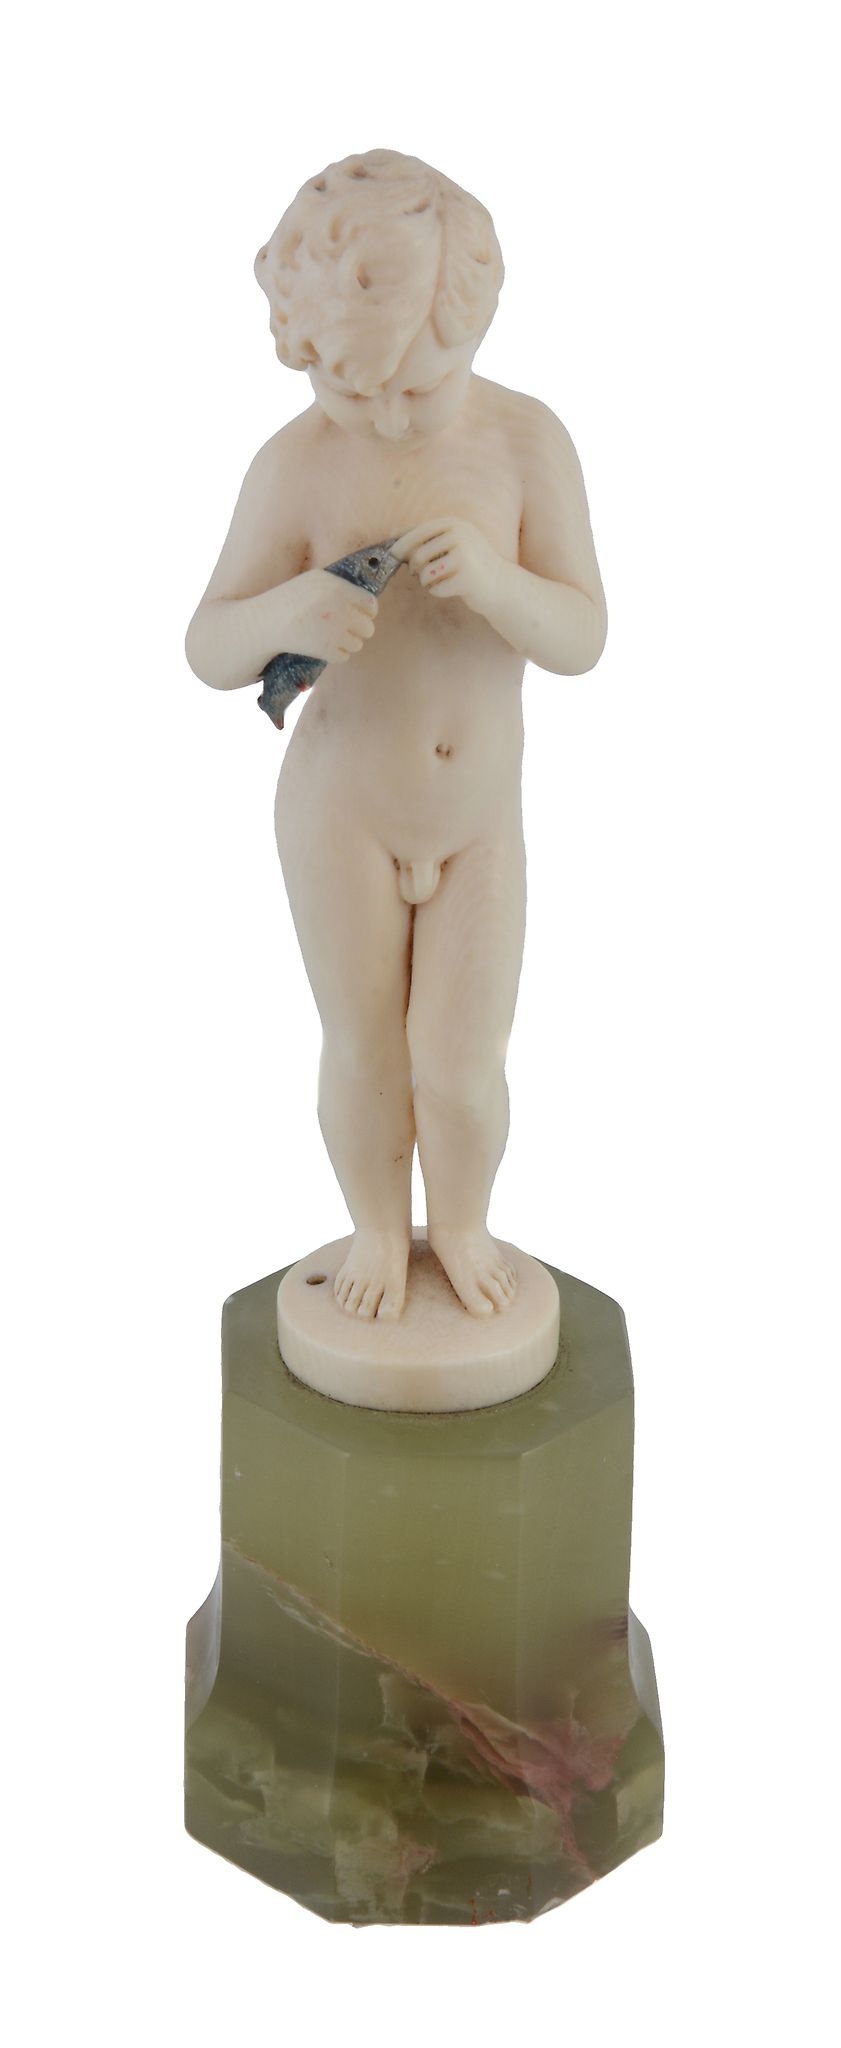 Ferdinand Preiss, an ivory carving of a fisher boy, circa 1930, signed  Ferdinand Preiss, an ivory